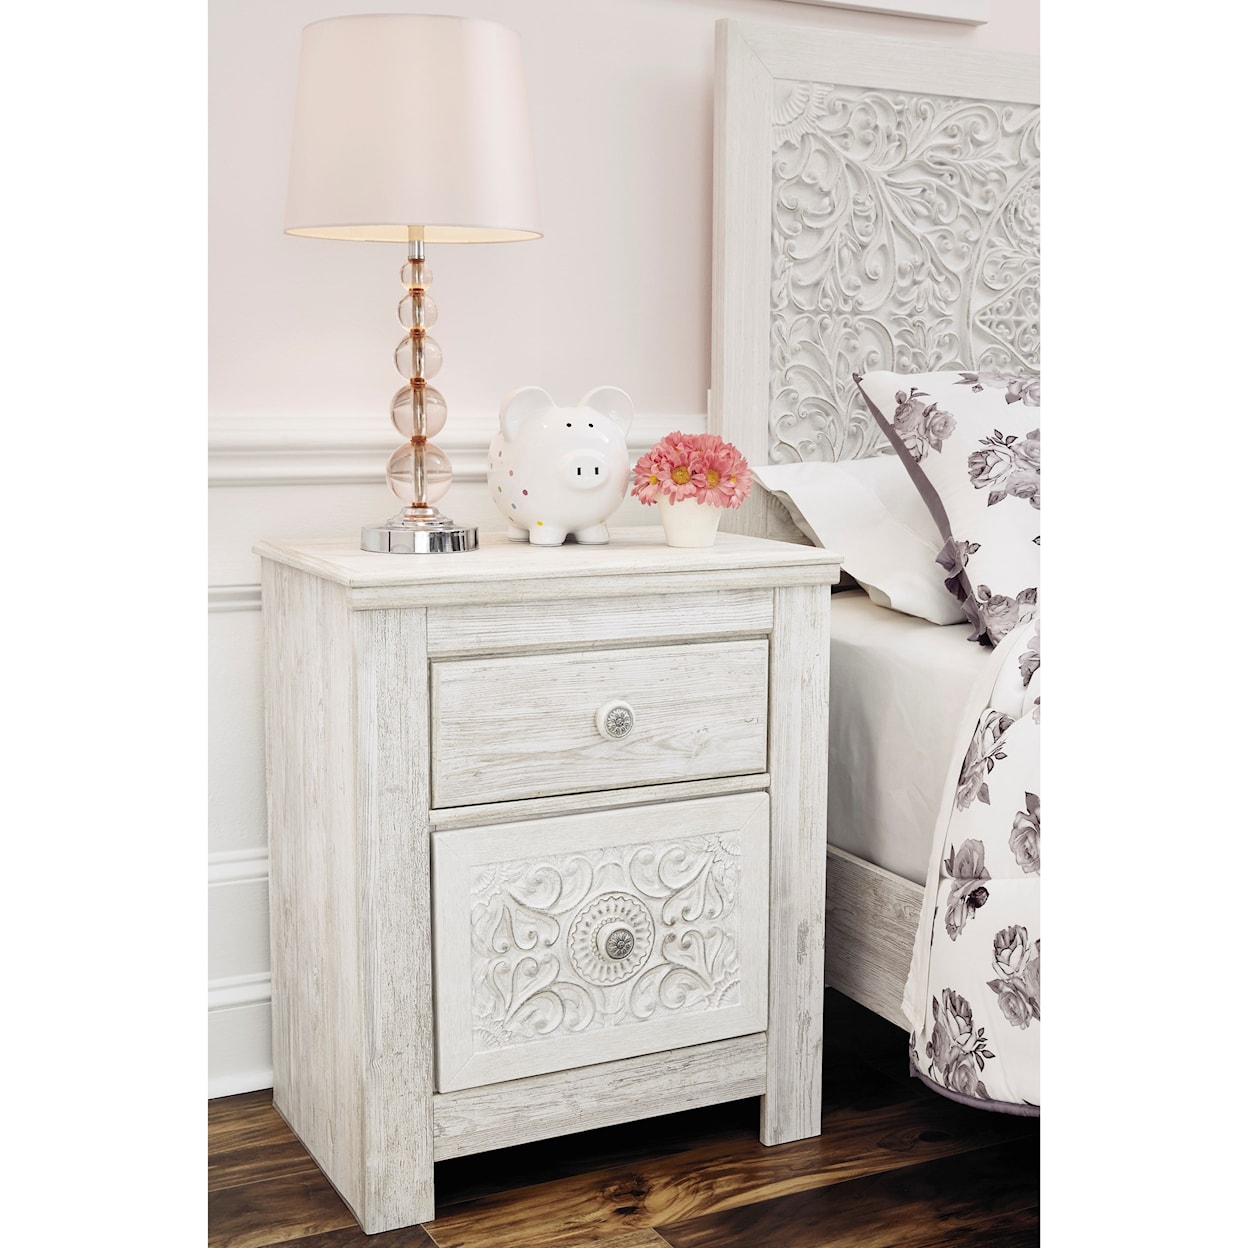 Signature Design by Ashley Paxberry Nightstand